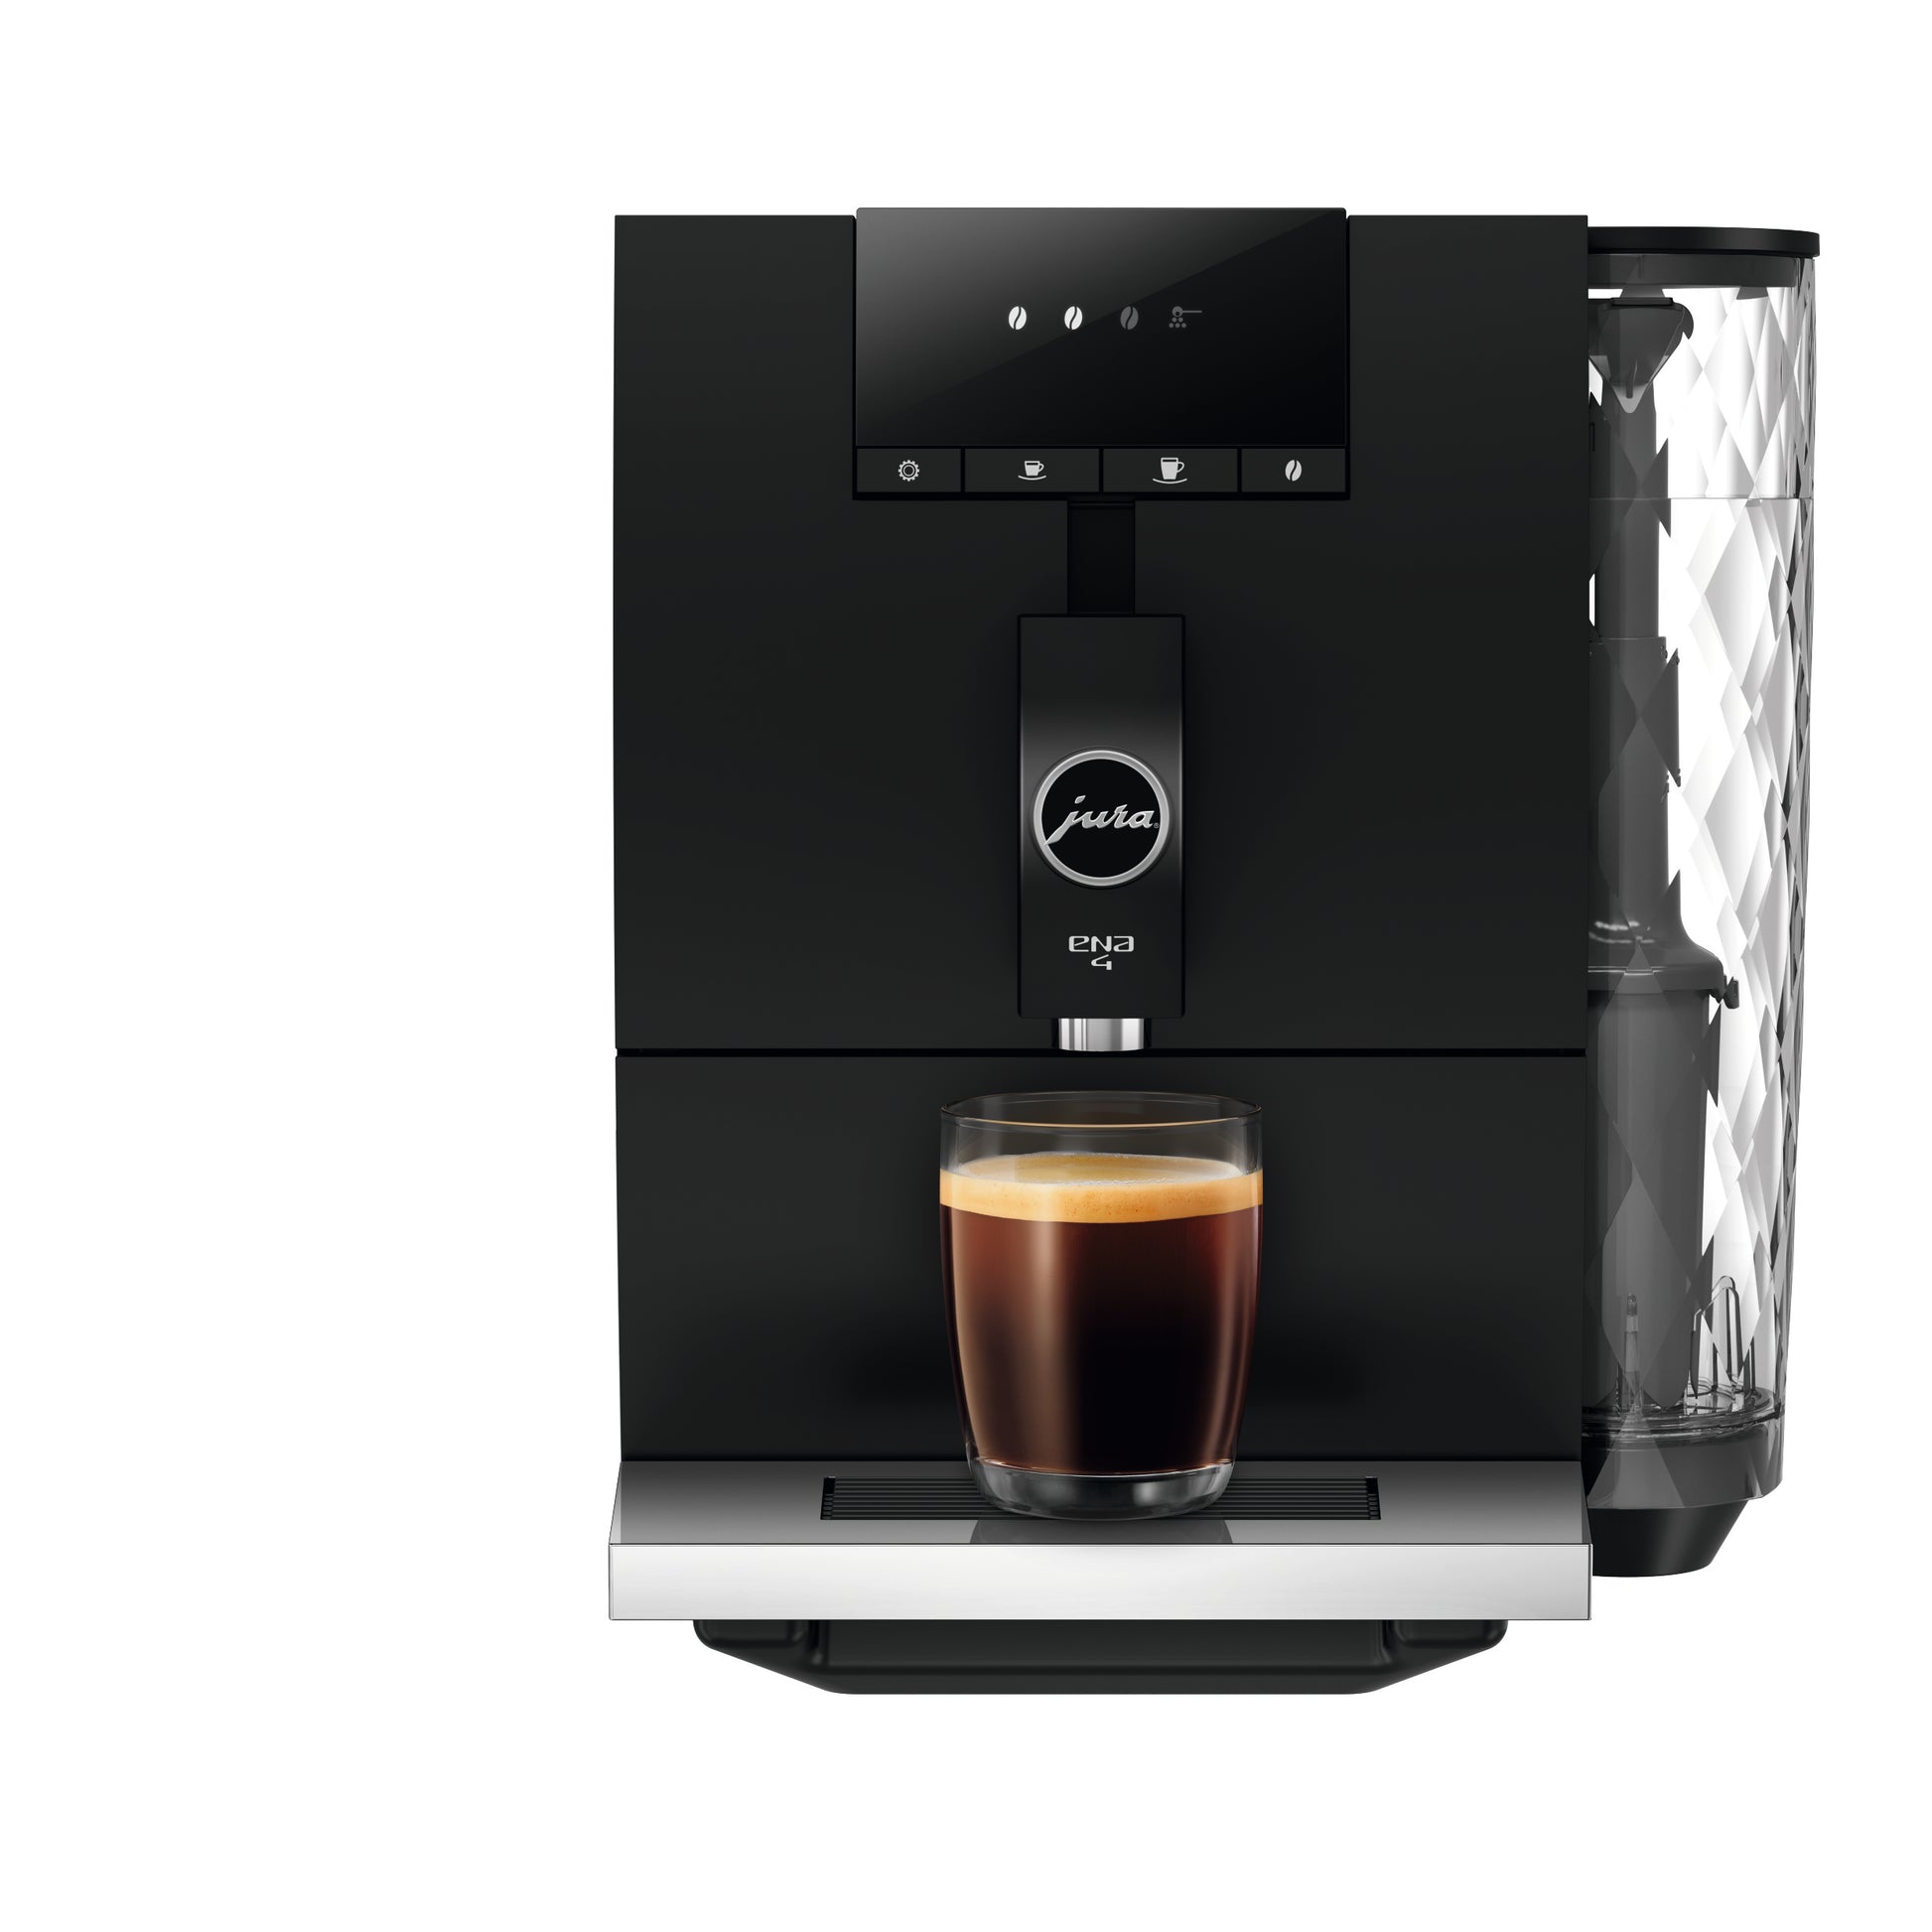 The Ultra-Fancy Coffee Machine Only Some Starbucks Stores Have